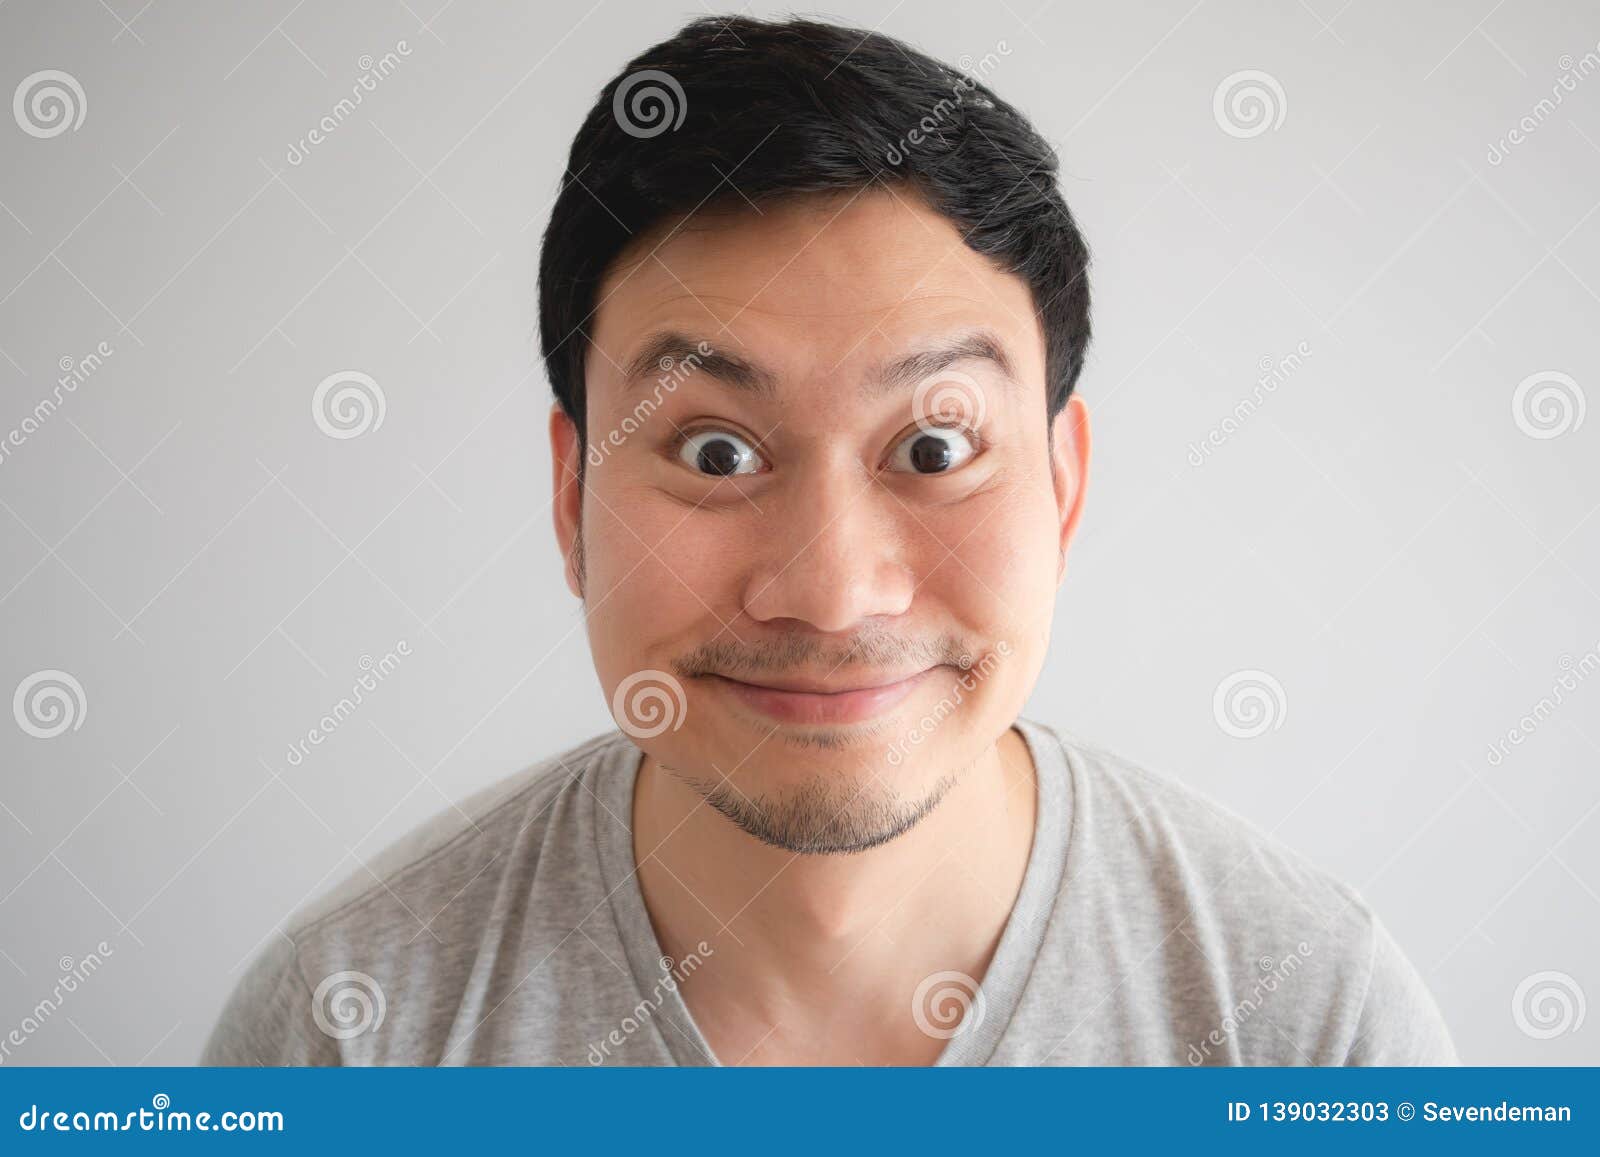 Very Happy Funny Face of Man with a Big Innocent Smile in Grey T-shirt  Stock Image - Image of expression, asia: 139032303